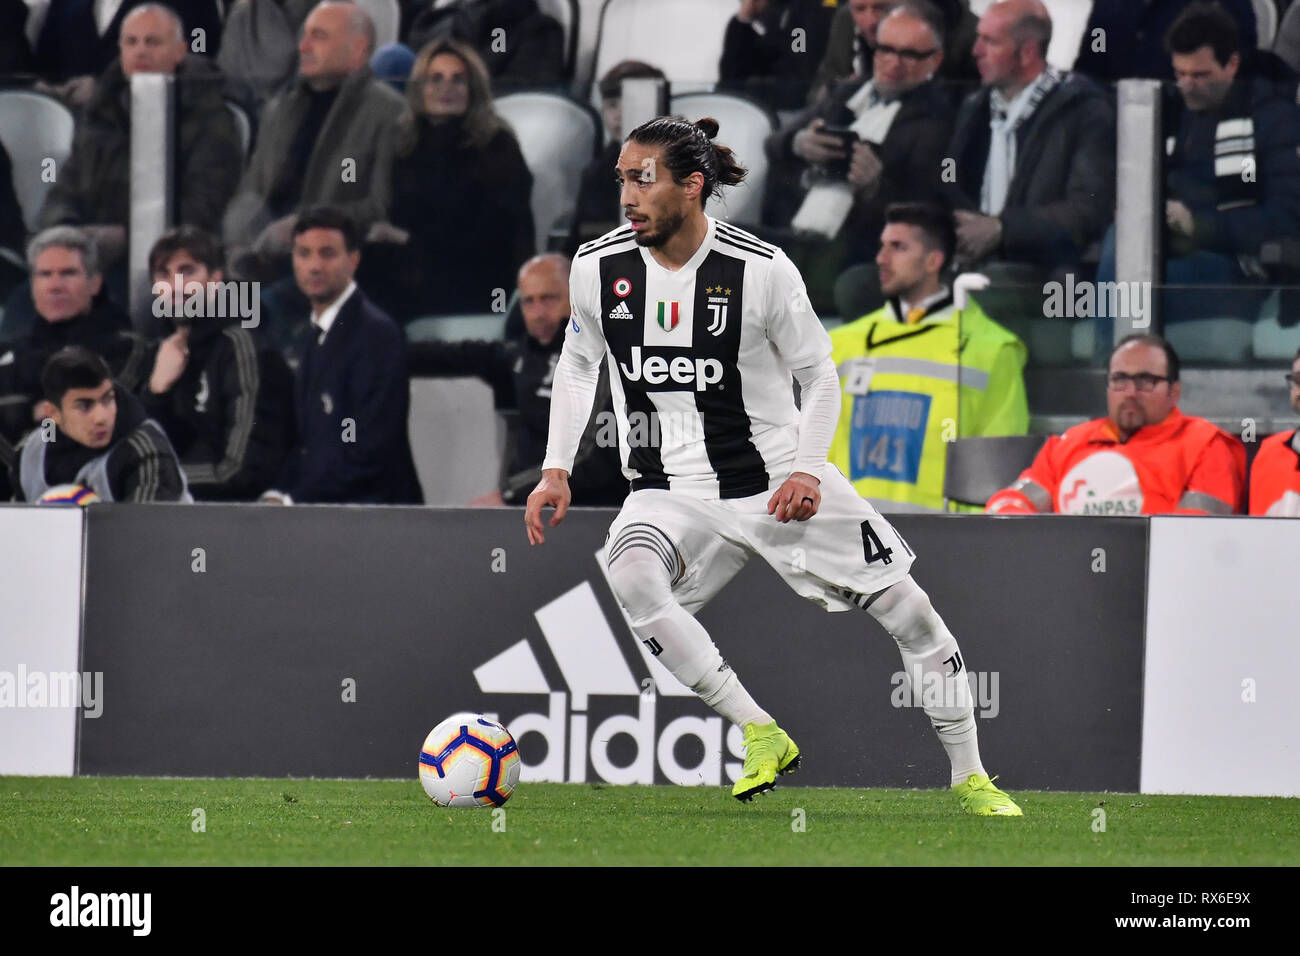 Turin, Italy. 8th Mar 2019. Martin Caceres (Juventus FC) during the Serie A football match between Juventus FC and Udinese Calcio at Allianz Stadium on 8th Mars, 2019 in Turin, Italy. Credit: FABIO PETROSINO/Alamy Live News Stock Photo